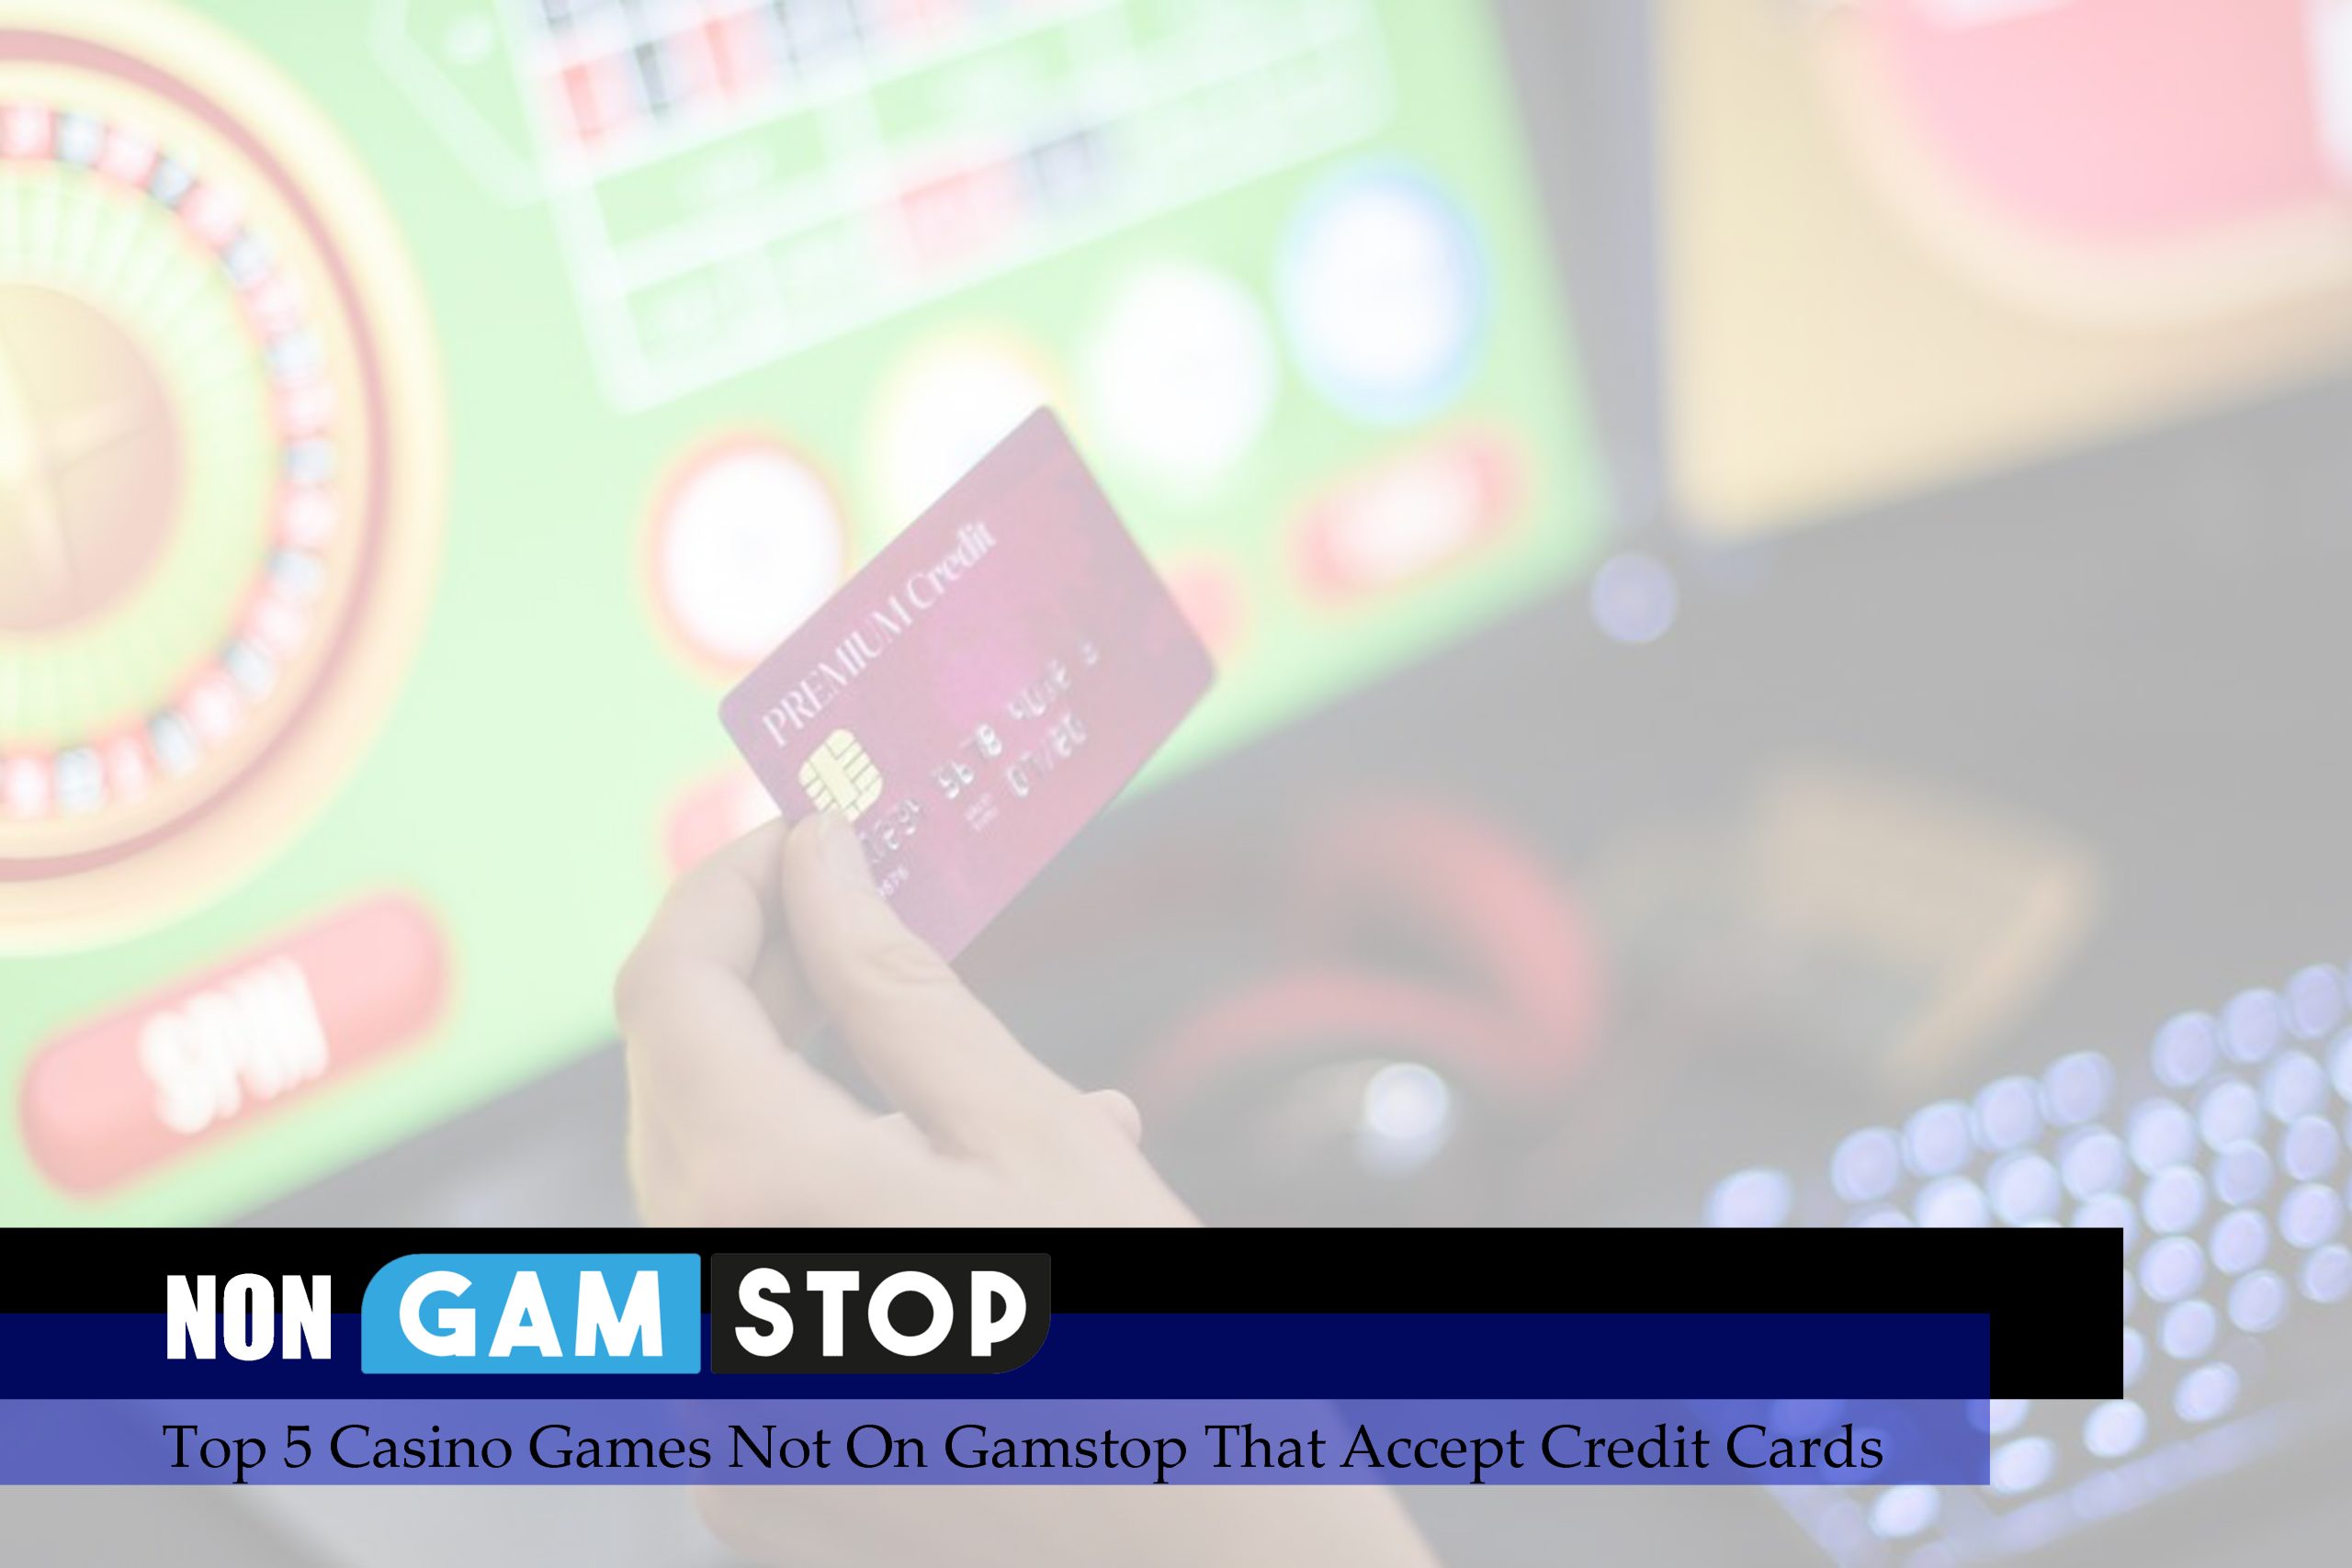 Top 5 Casino Games Not On Gamstop That Accept Credit Cards